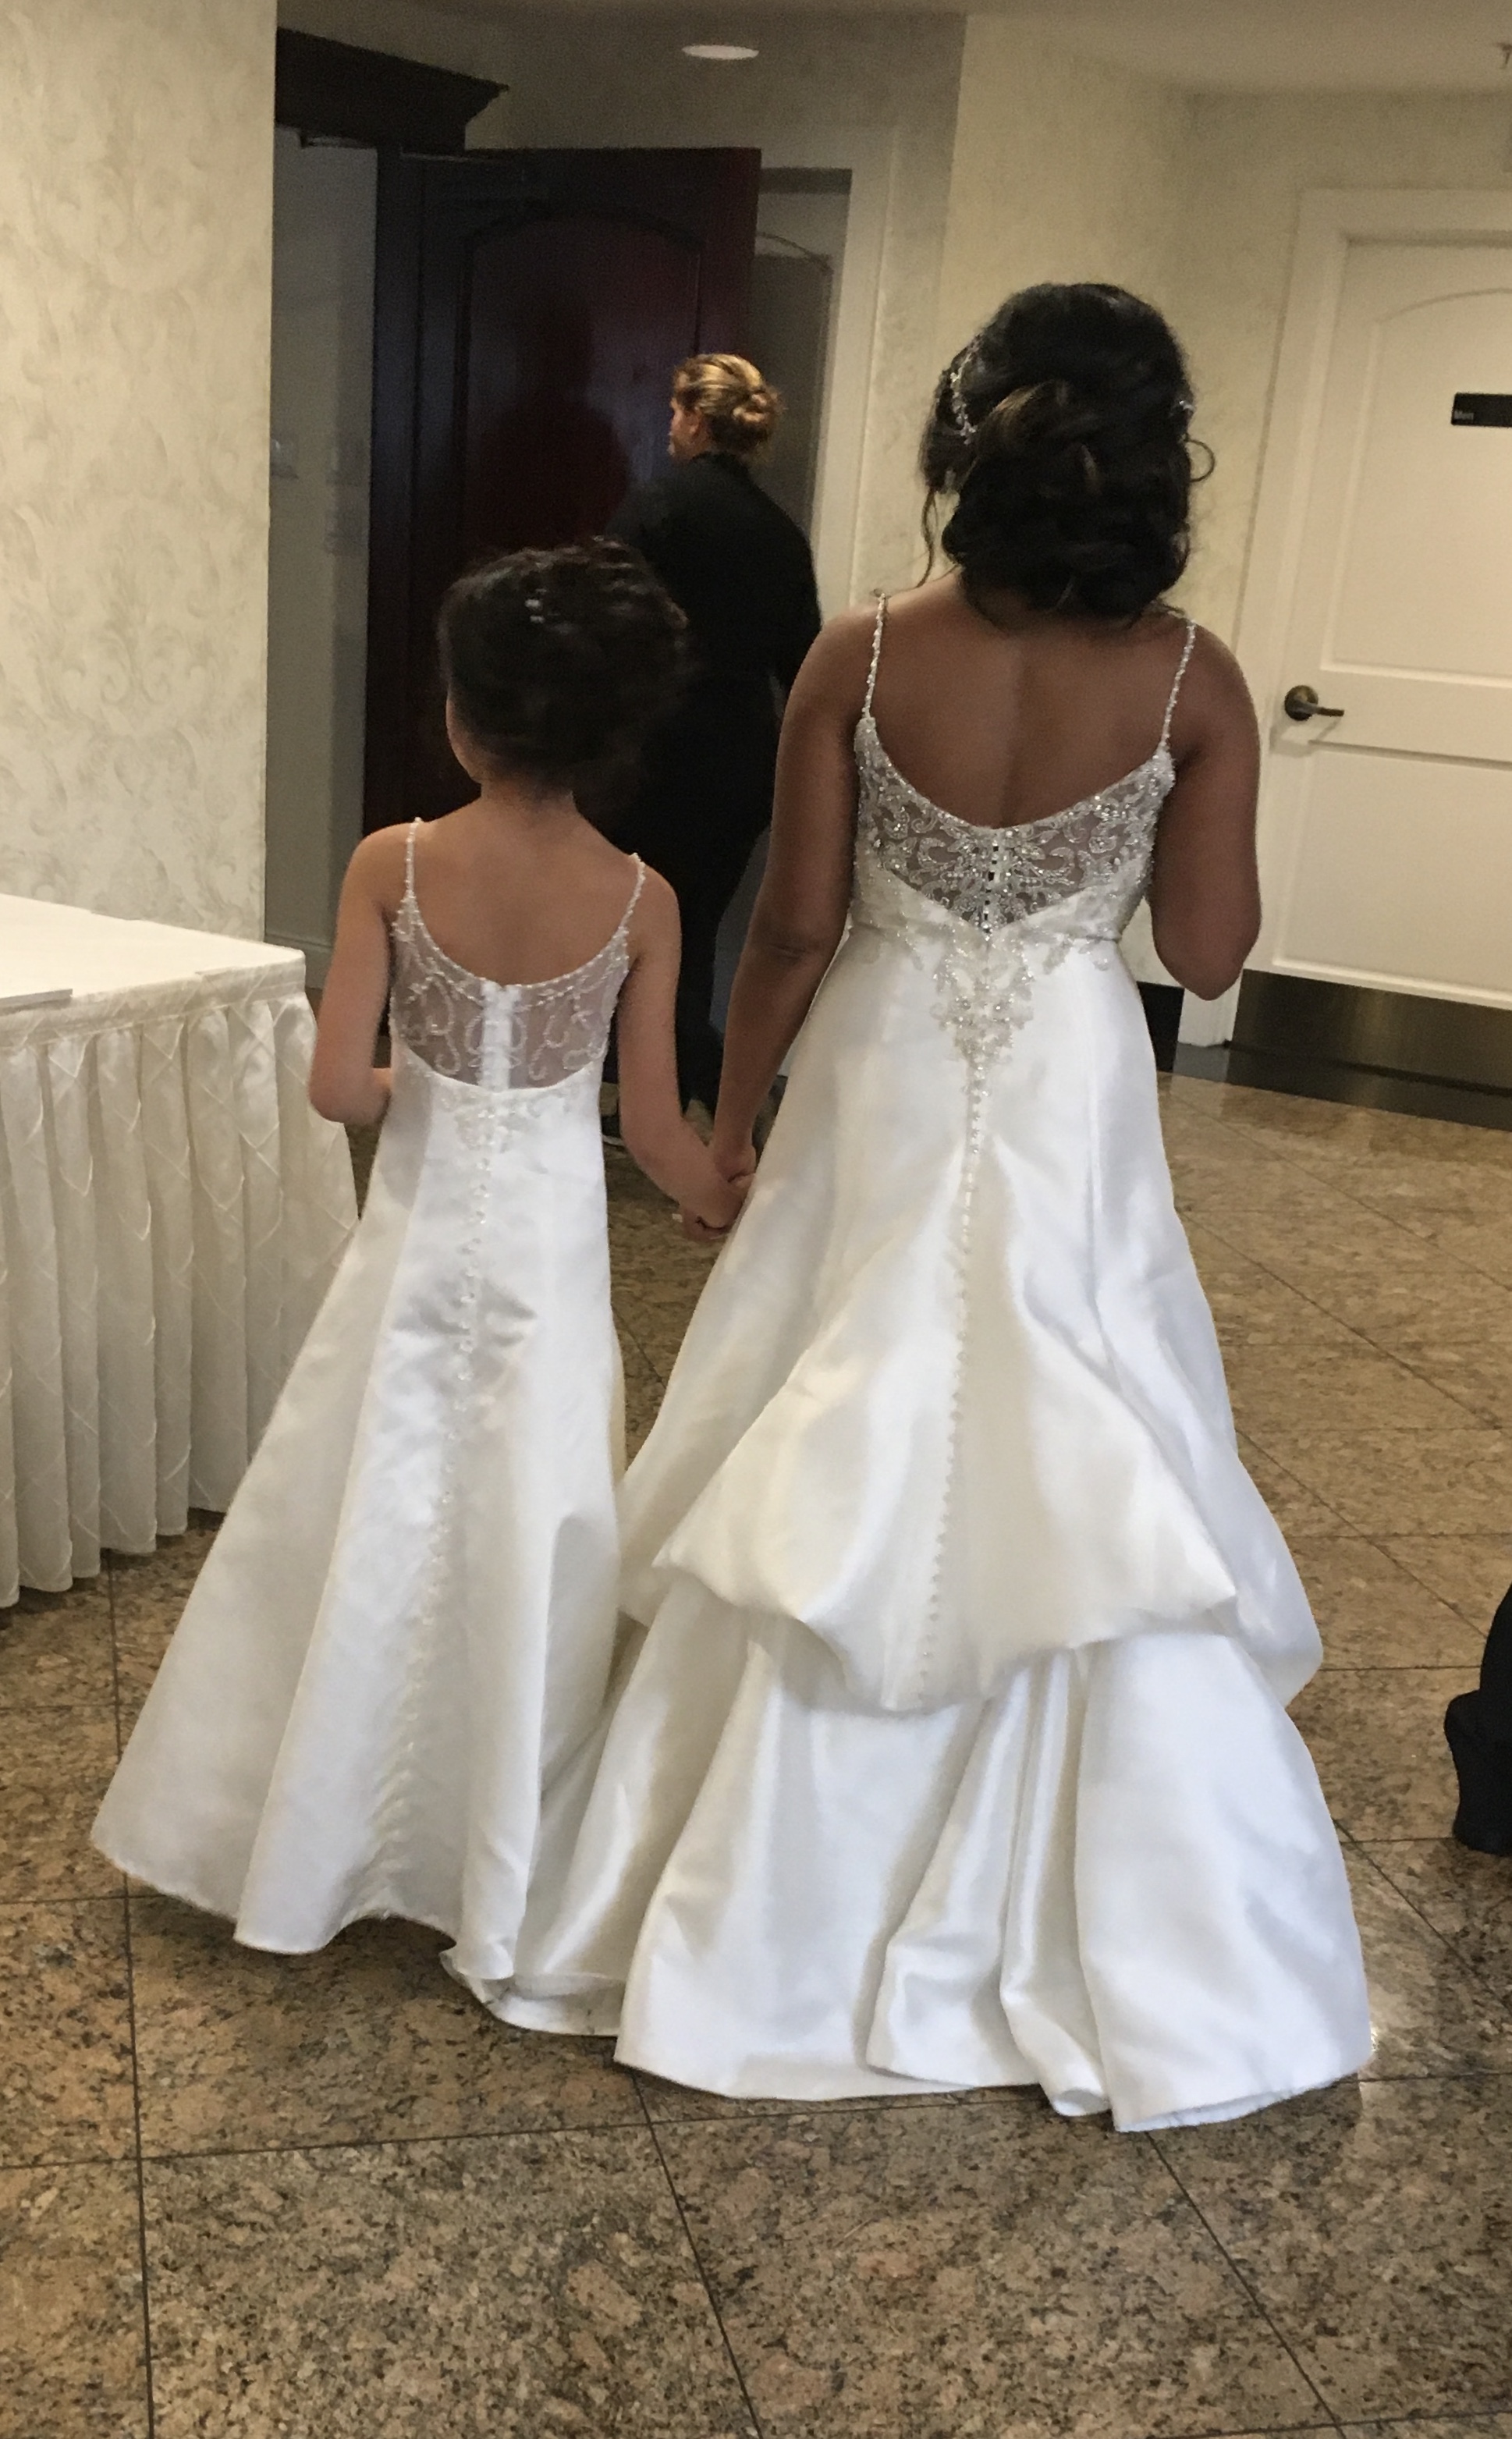 I would love for my daughter to have a matching flower girl dress. I have the Kimberly dress by Maggie Sottero. 